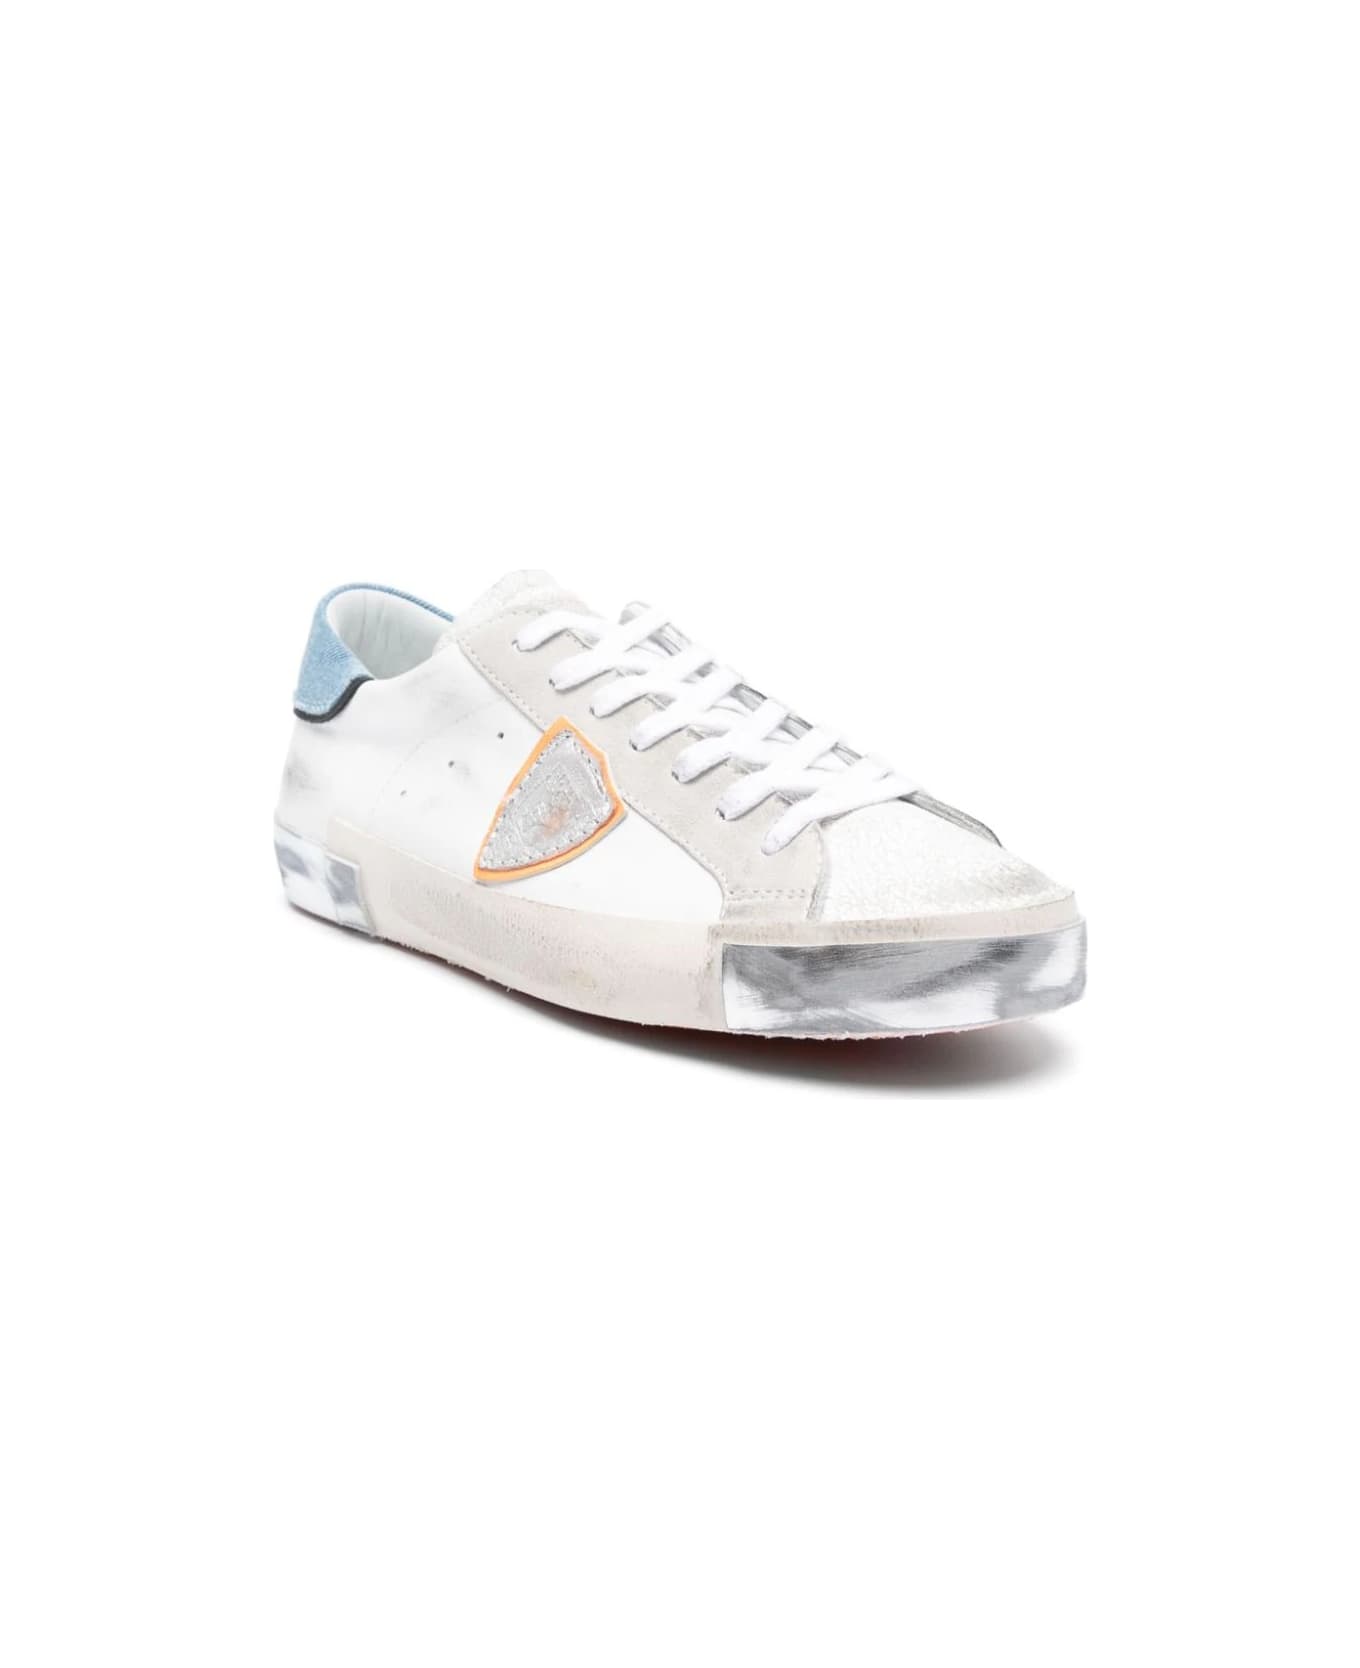 Philippe Model Prsx Low Sneakers - White And Light Blue - White